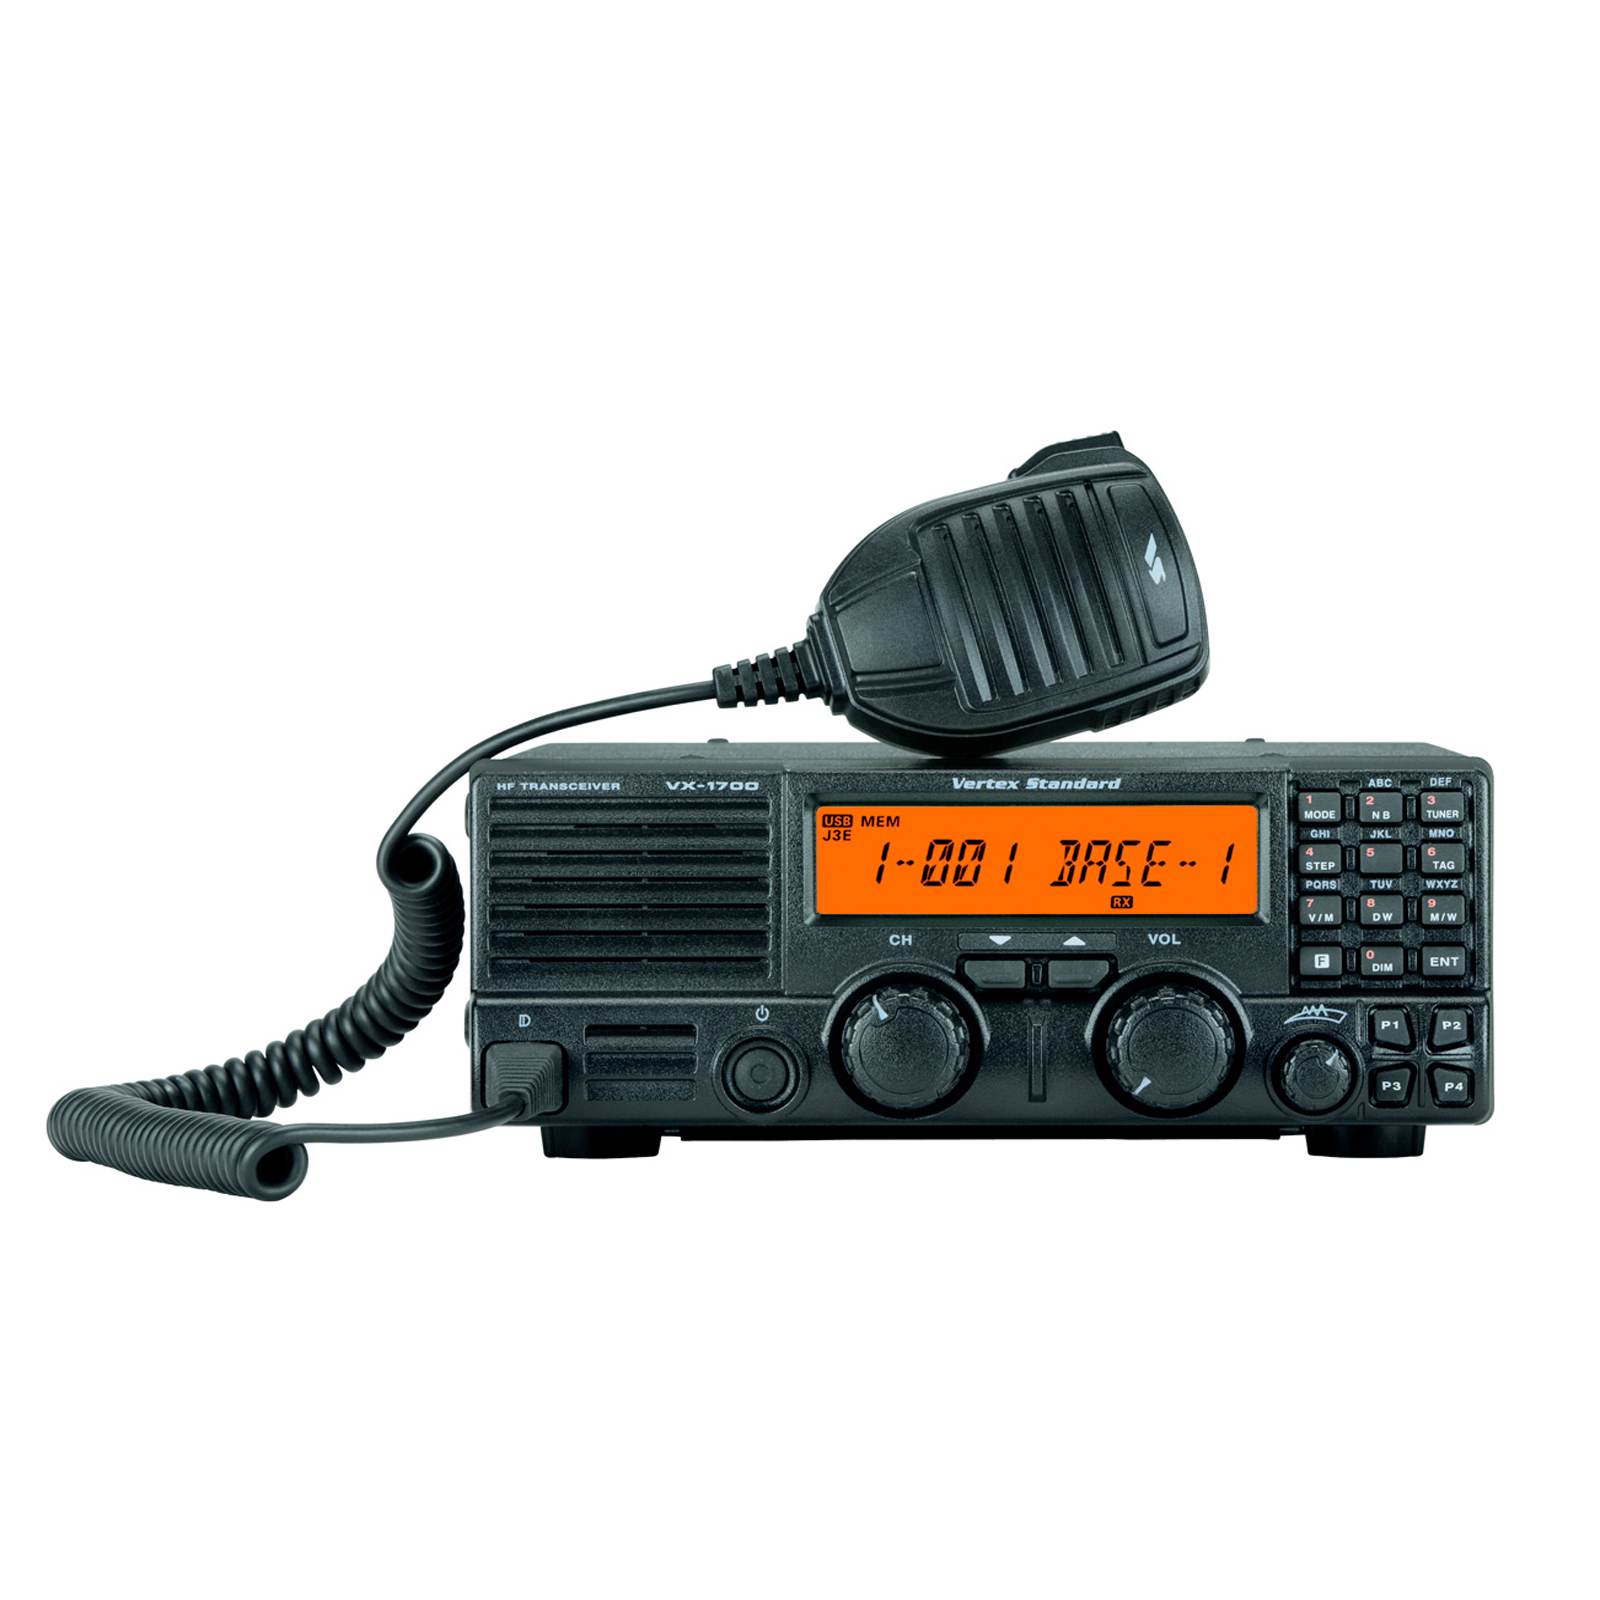 Telestar System Telecommunications Rome (Italy) Analogue Licensed Mobile Radios VX-1700